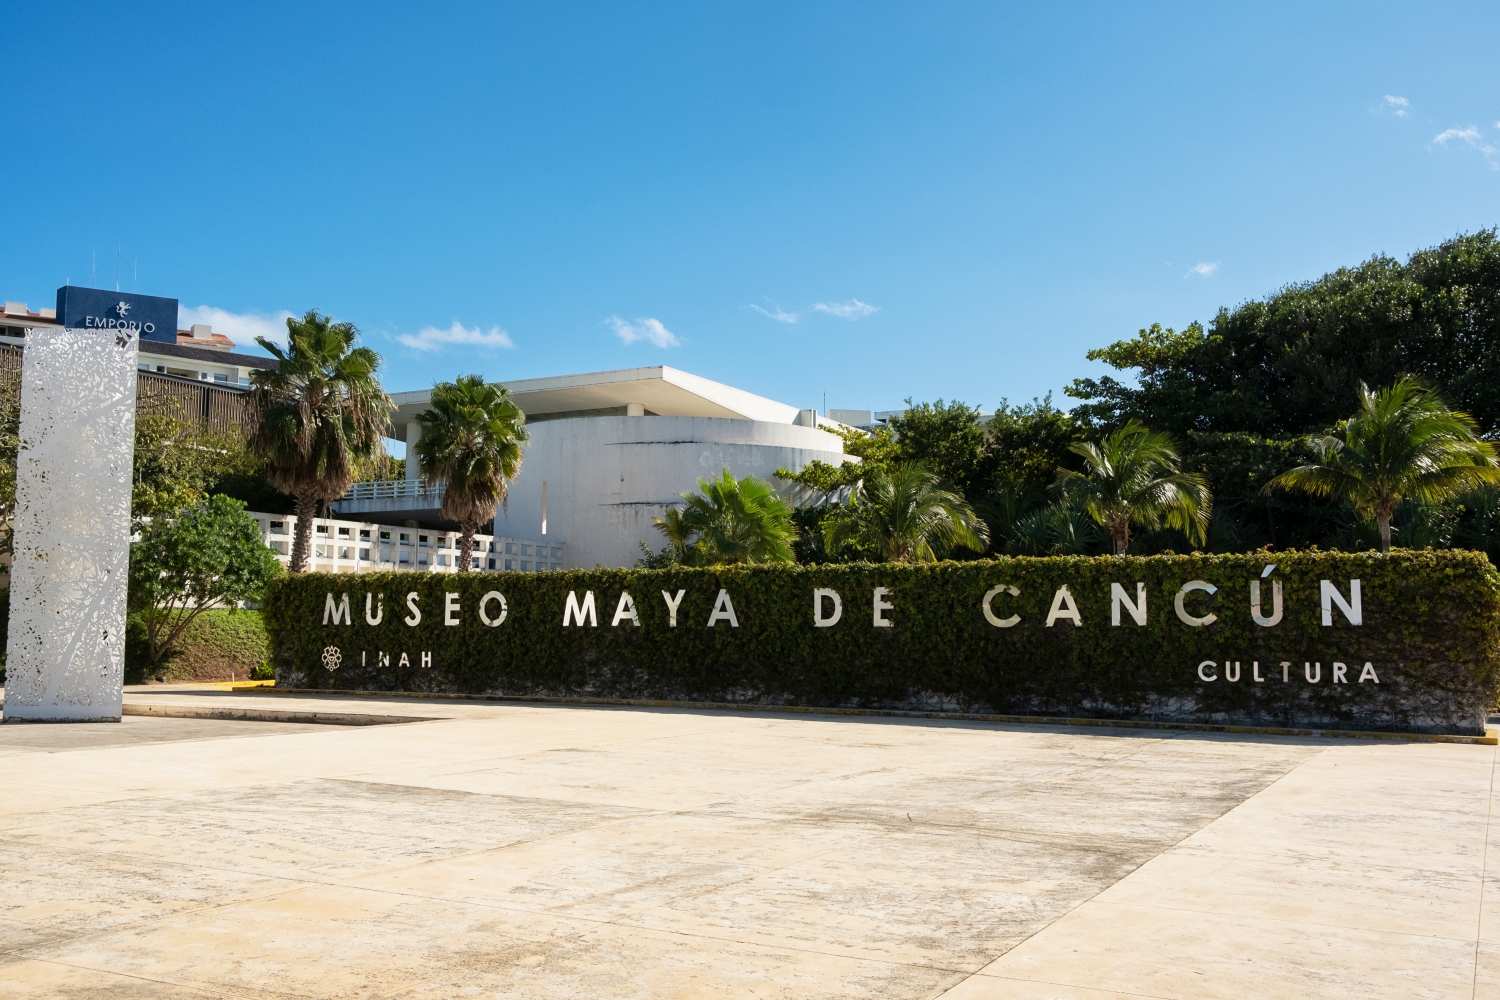 Tourist Activities in the Mayan Museum of Cancu